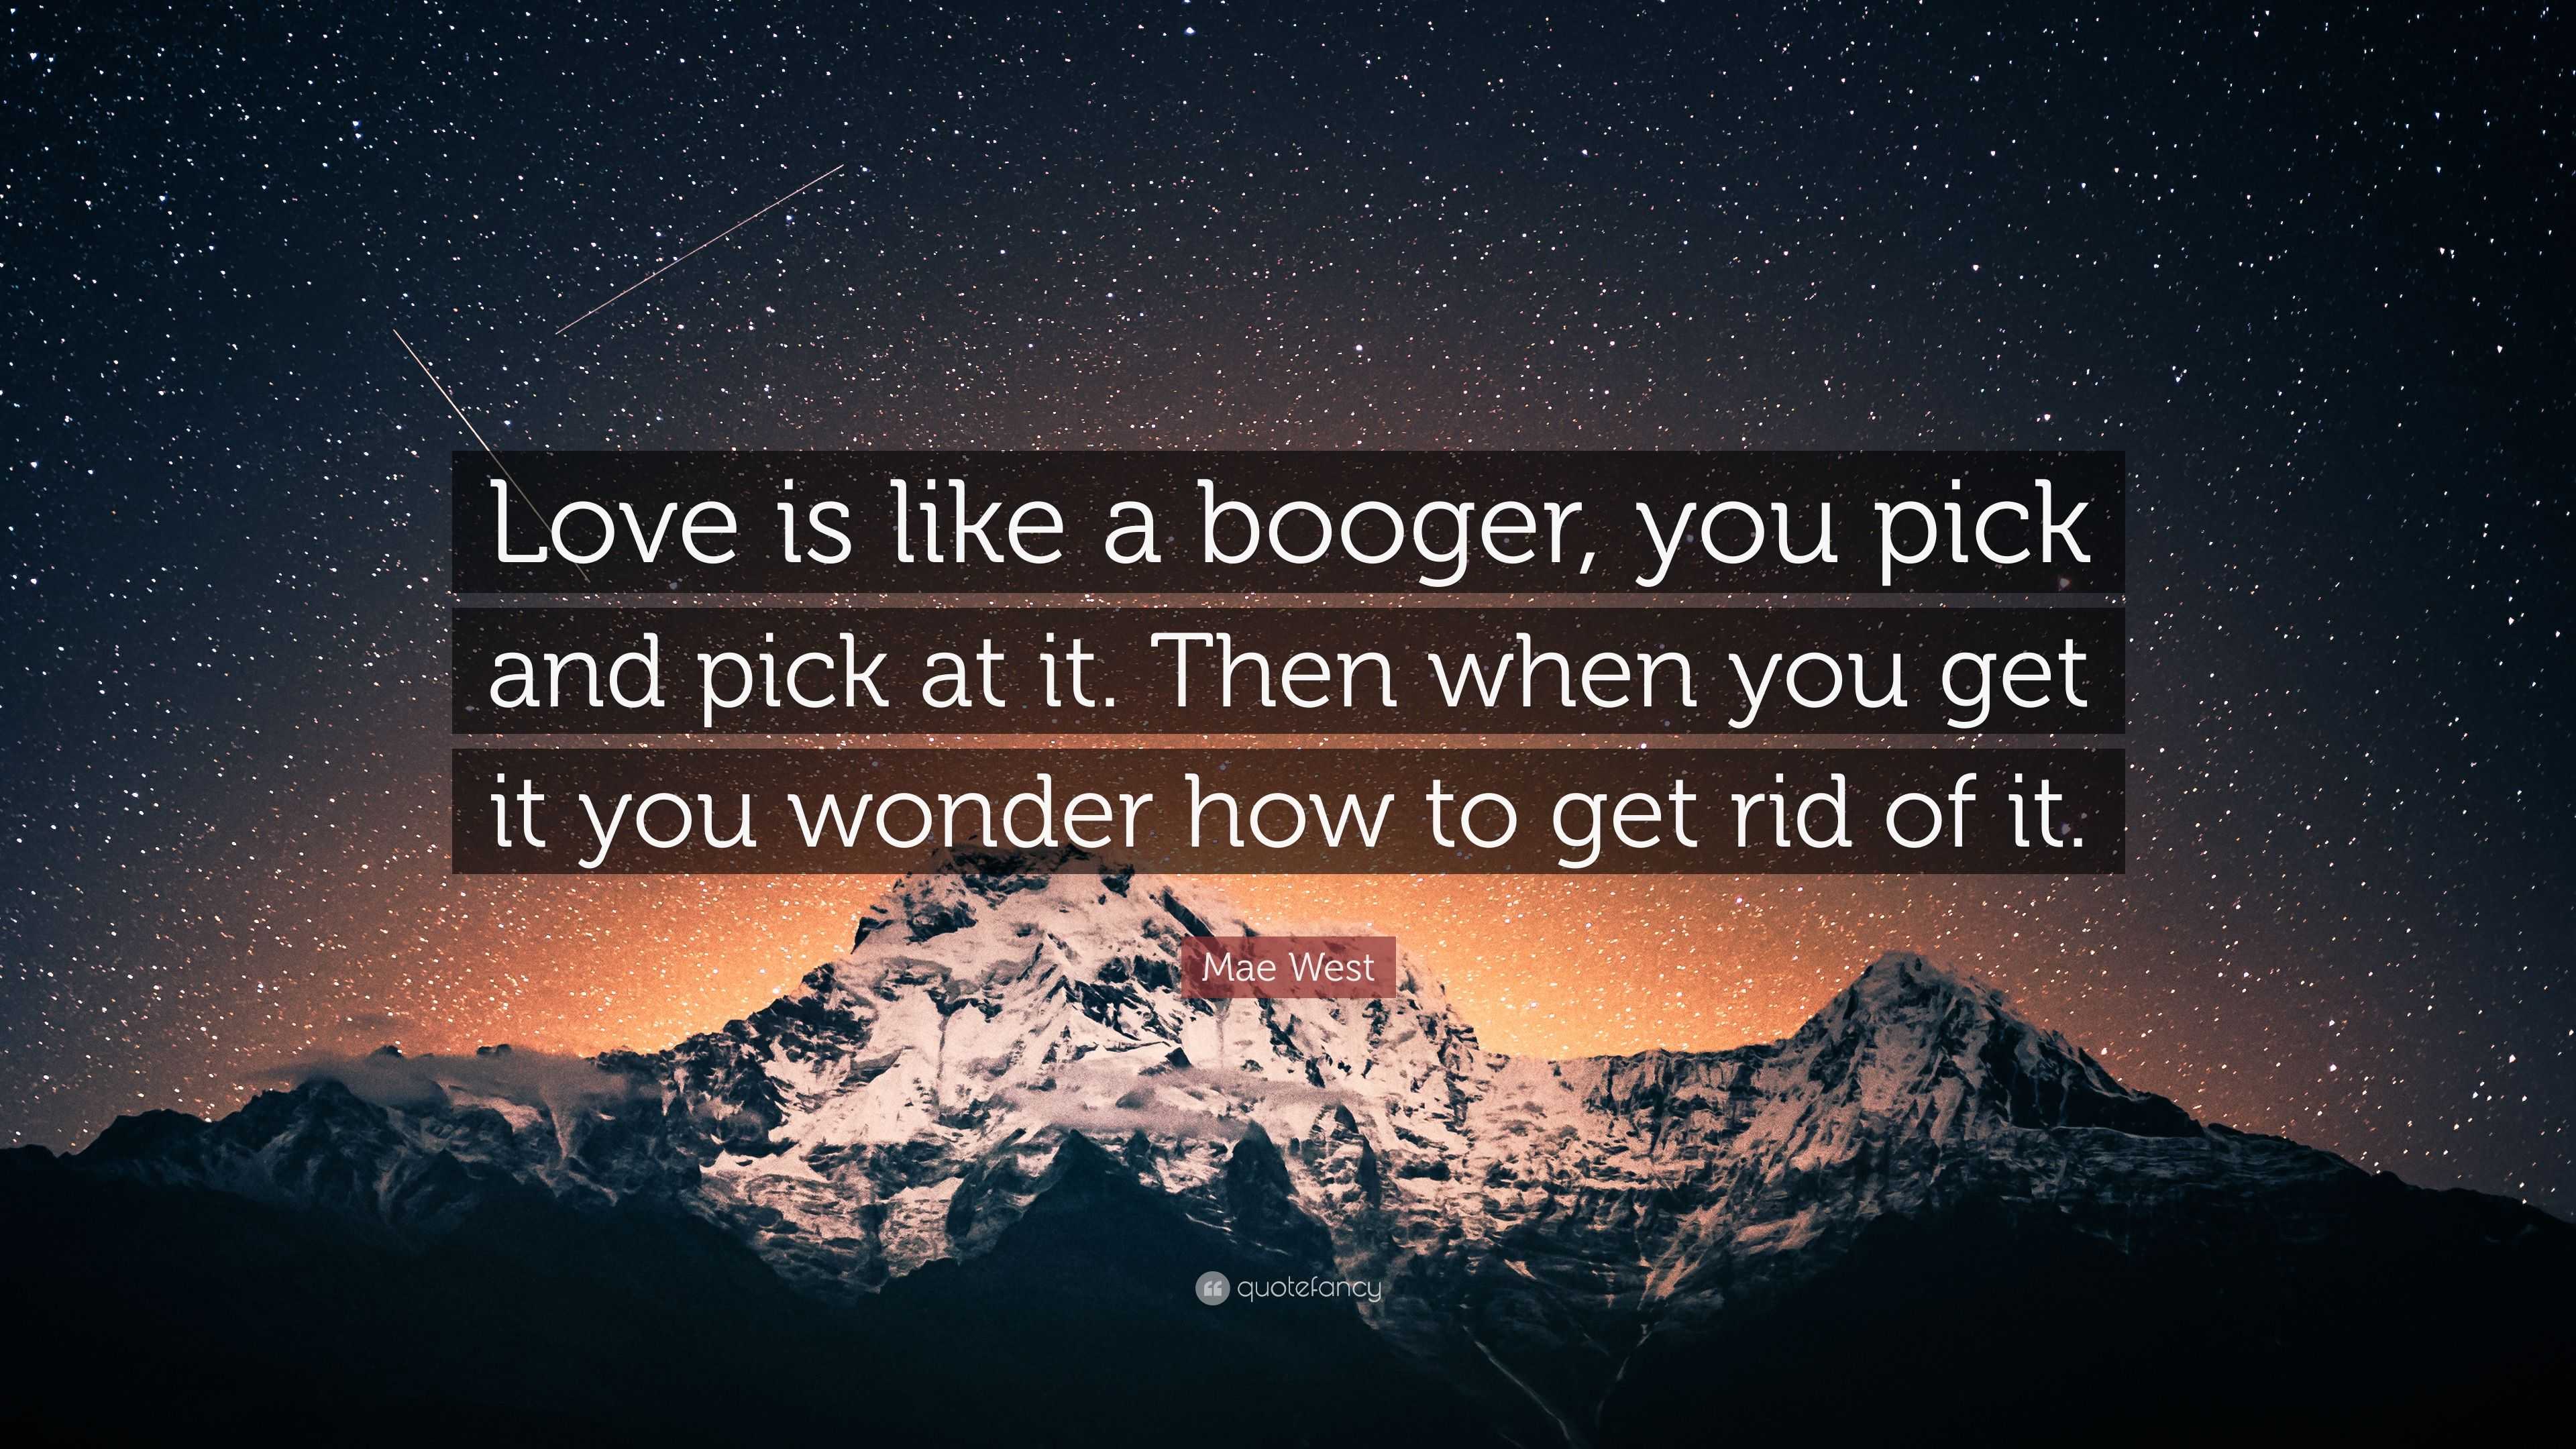 Mae West Quote “Love is like a booger you pick and pick at